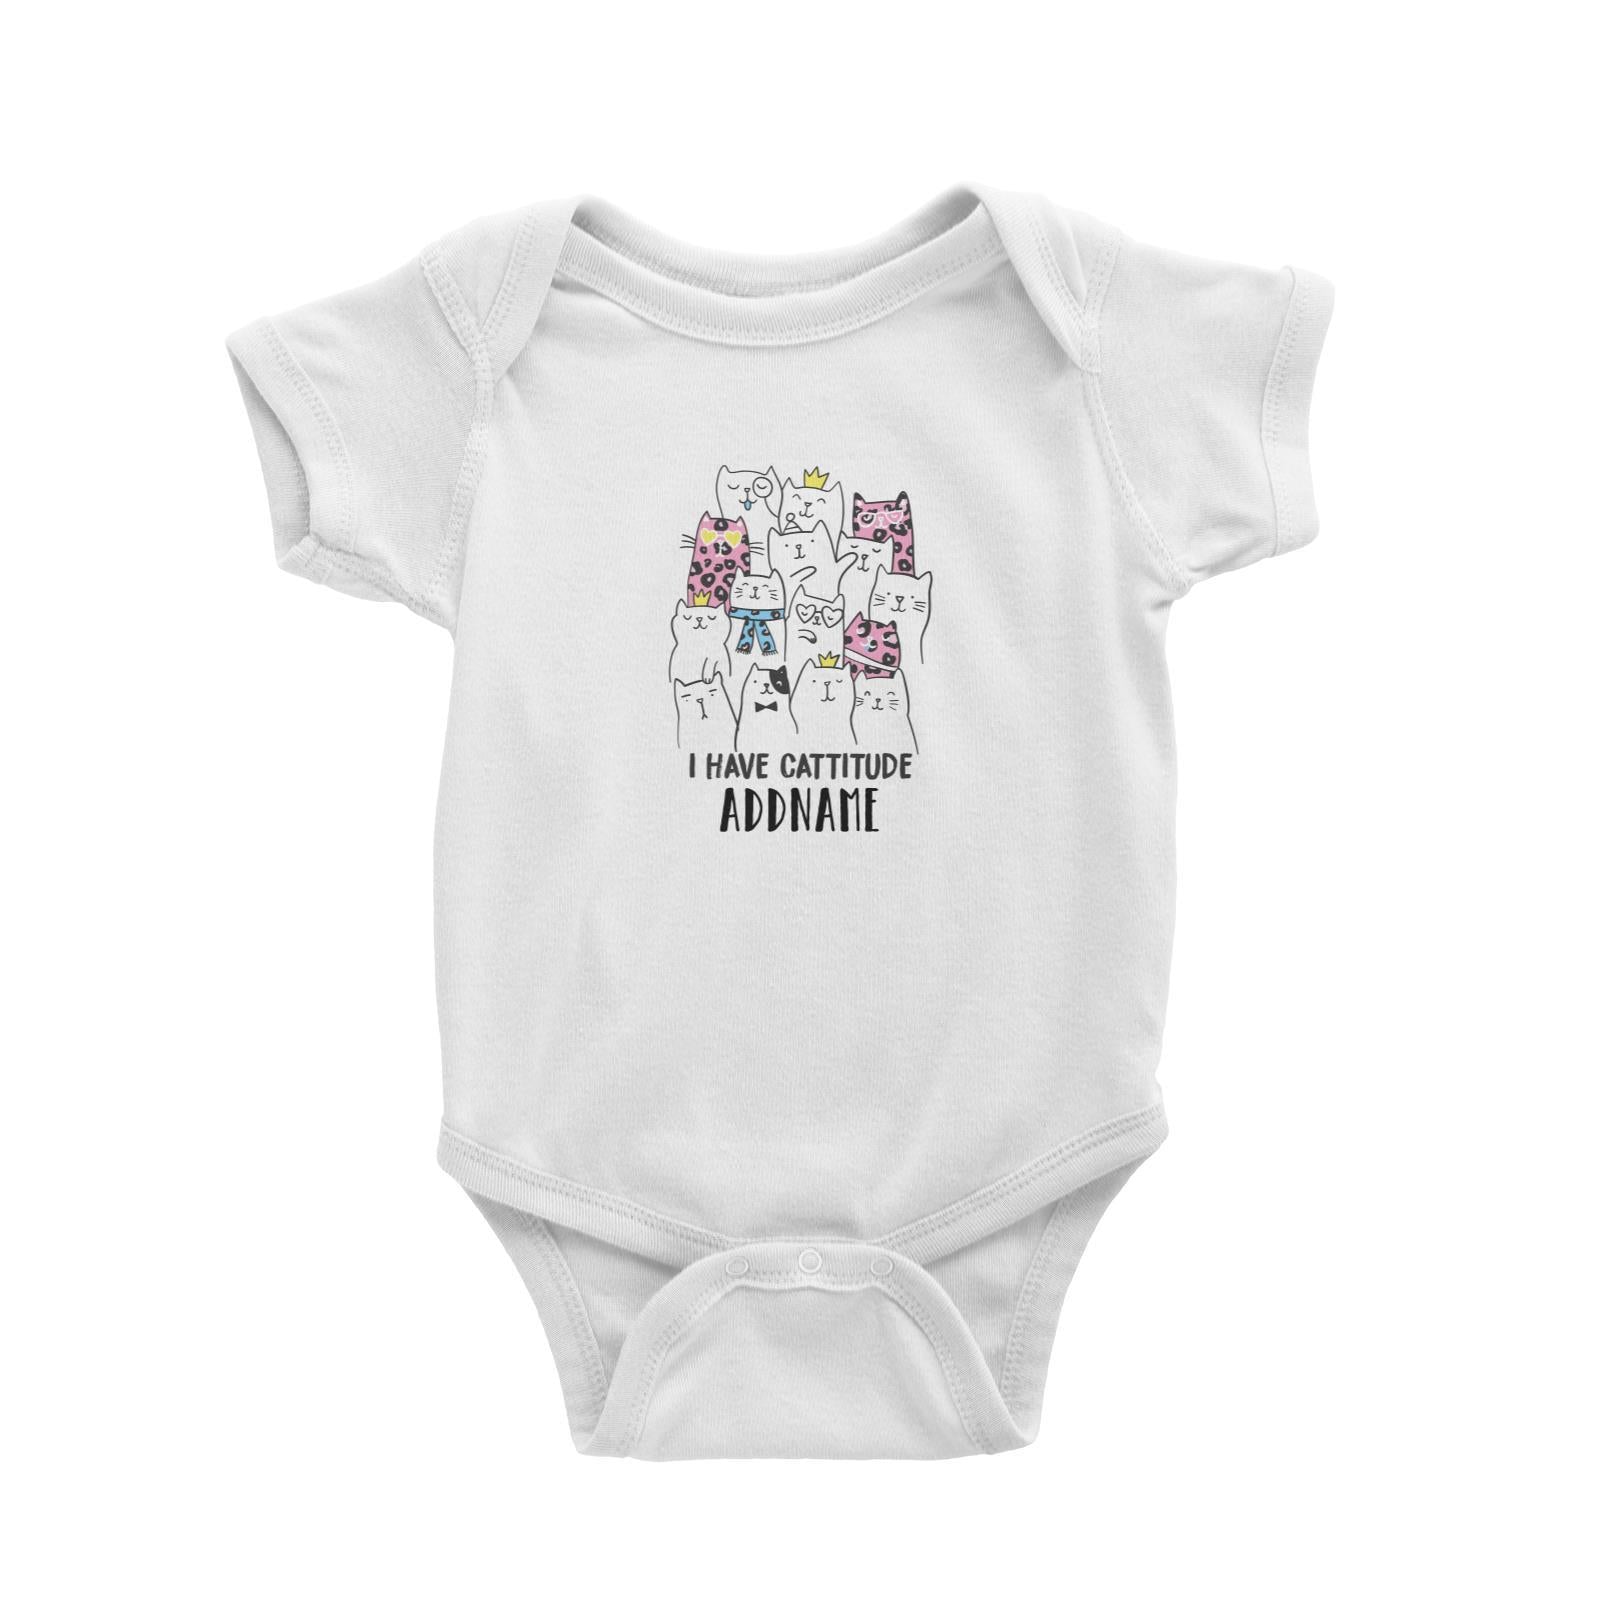 Cool Vibrant Series I Have Cattitude Addname Baby Romper